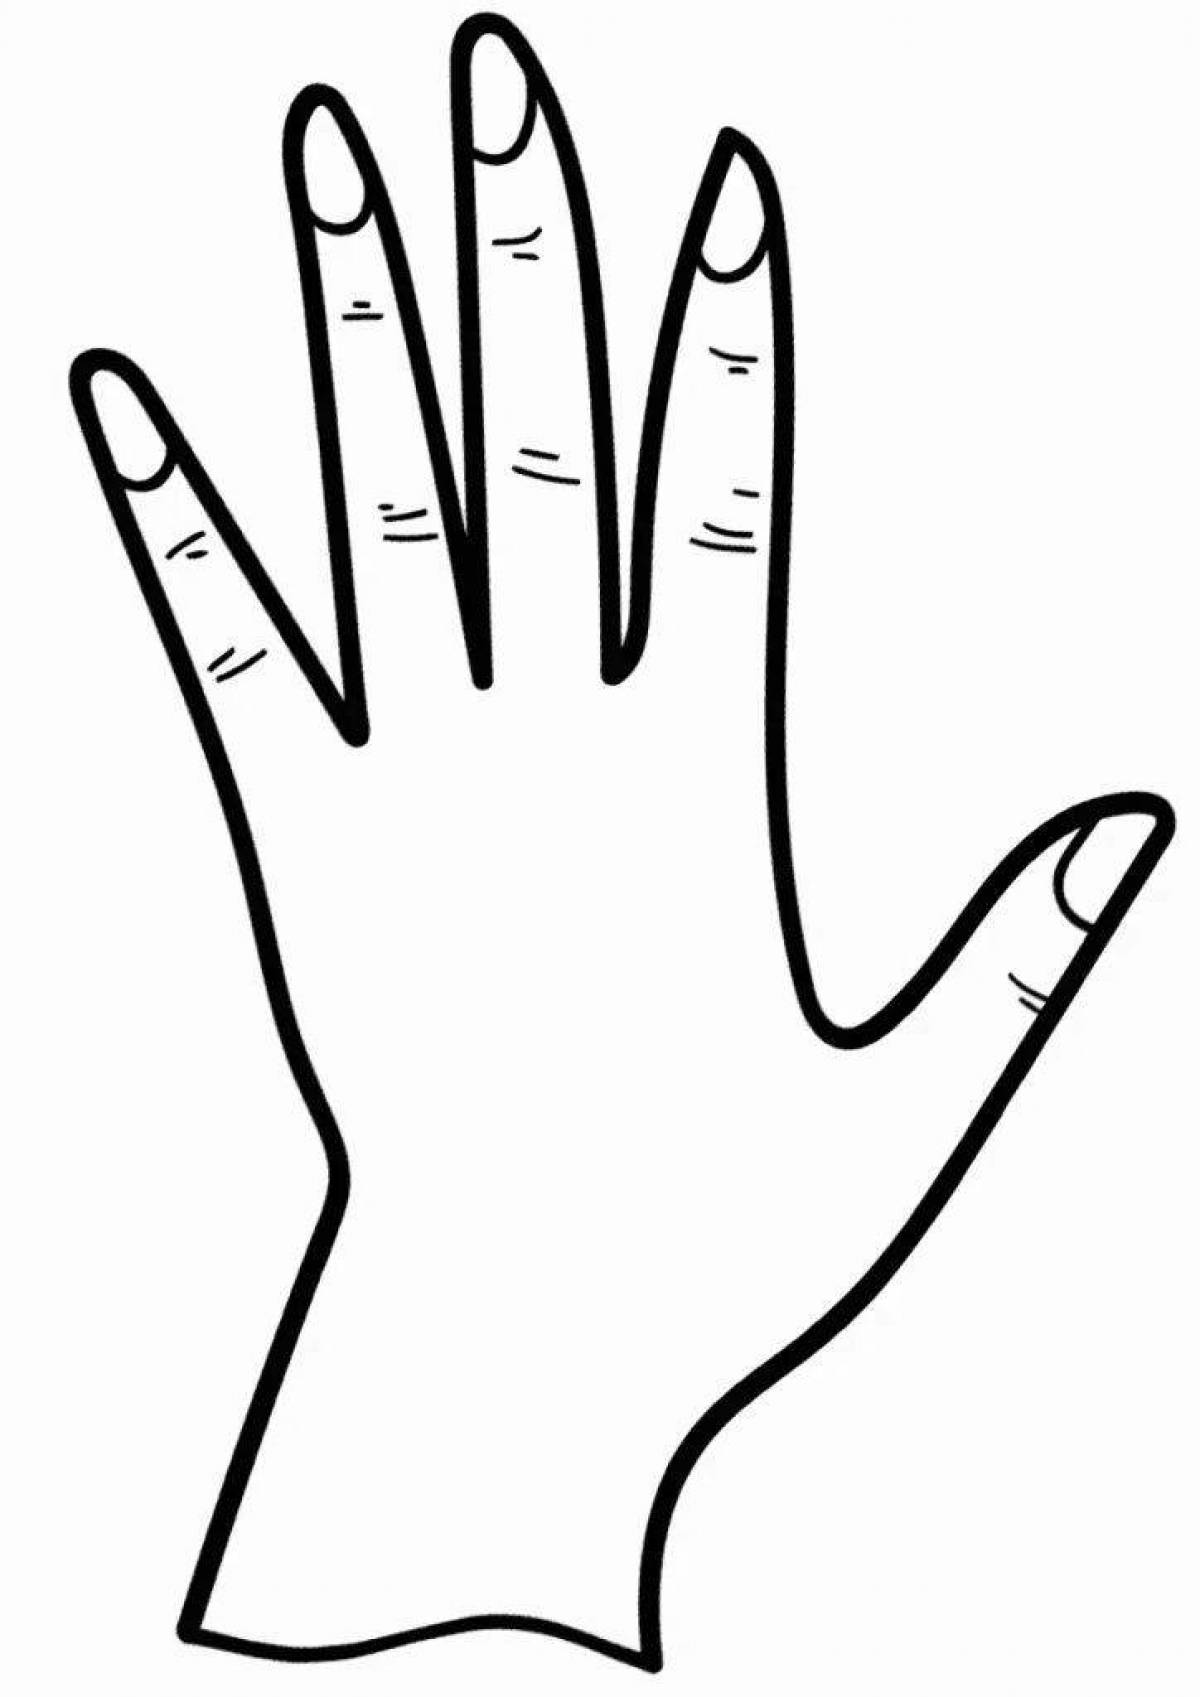 Coloring page of human hands